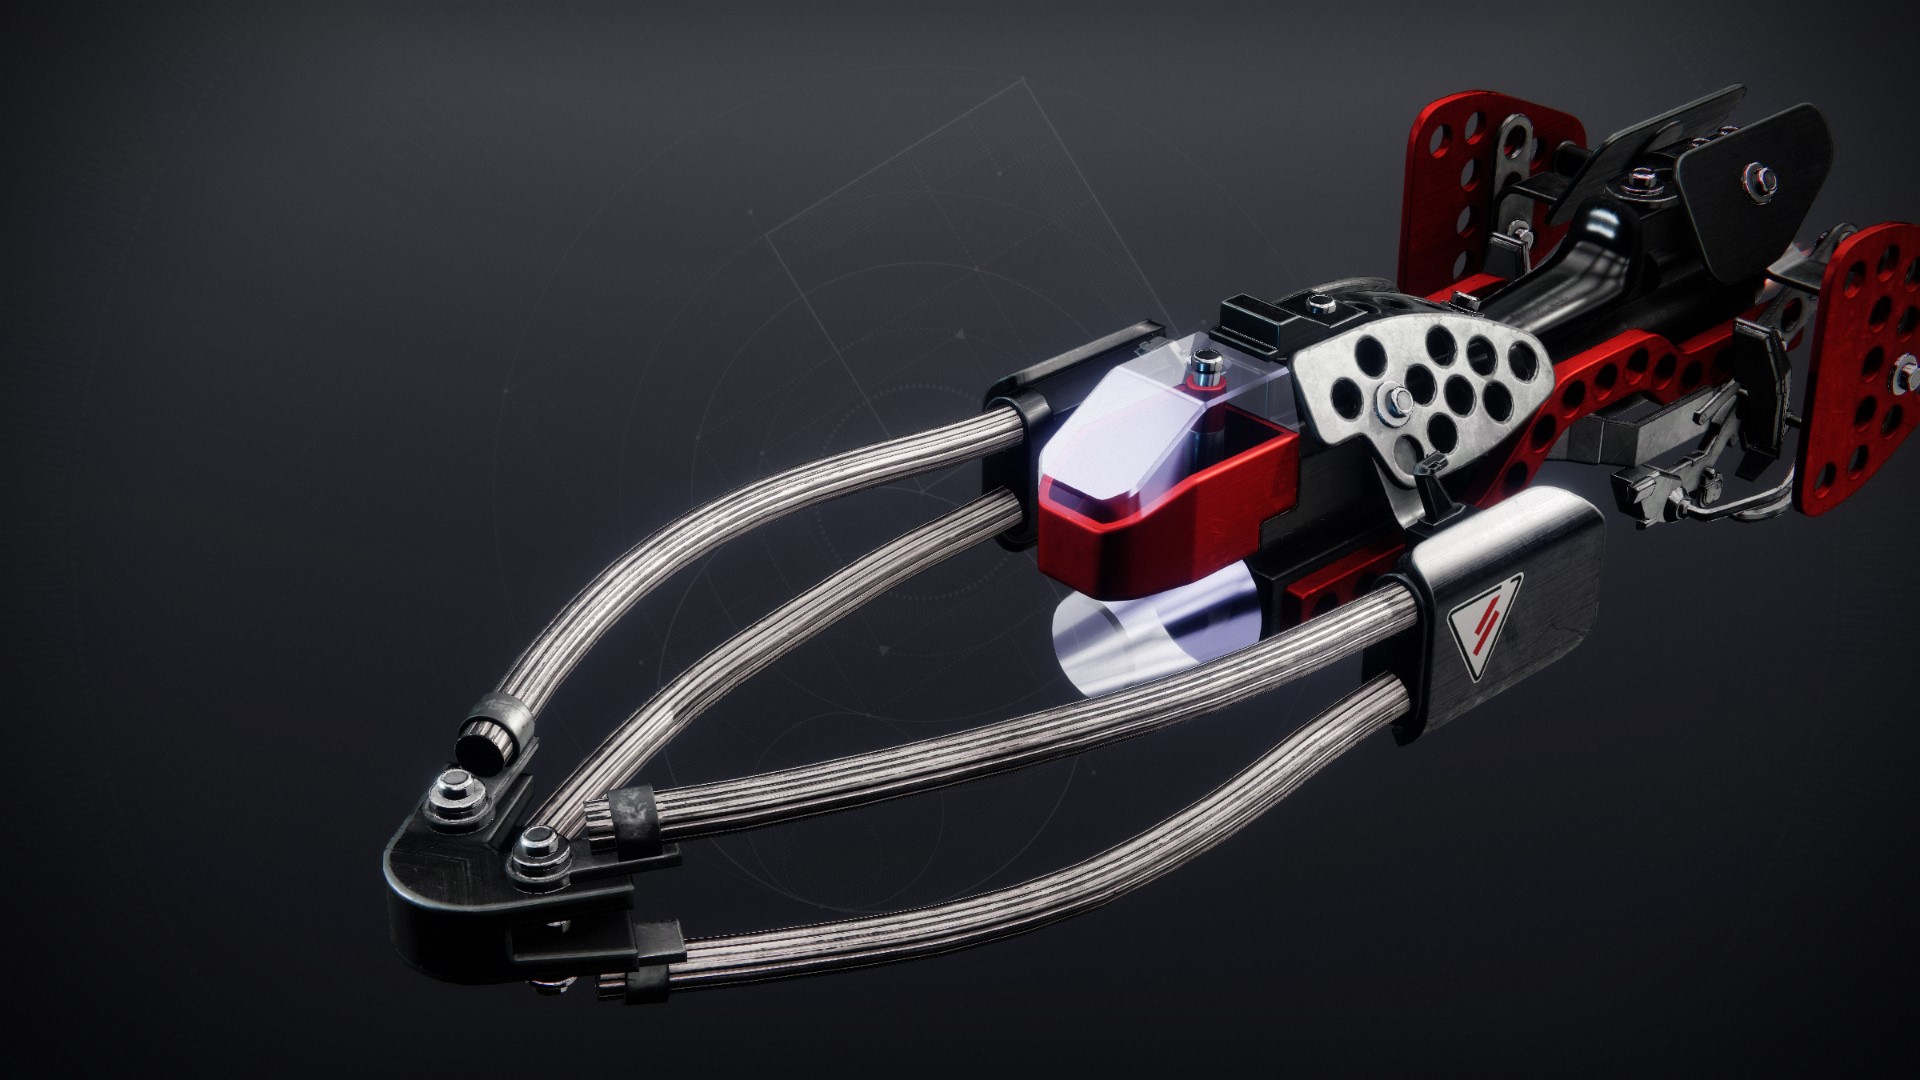 An in-game render of the Assembly Rider.